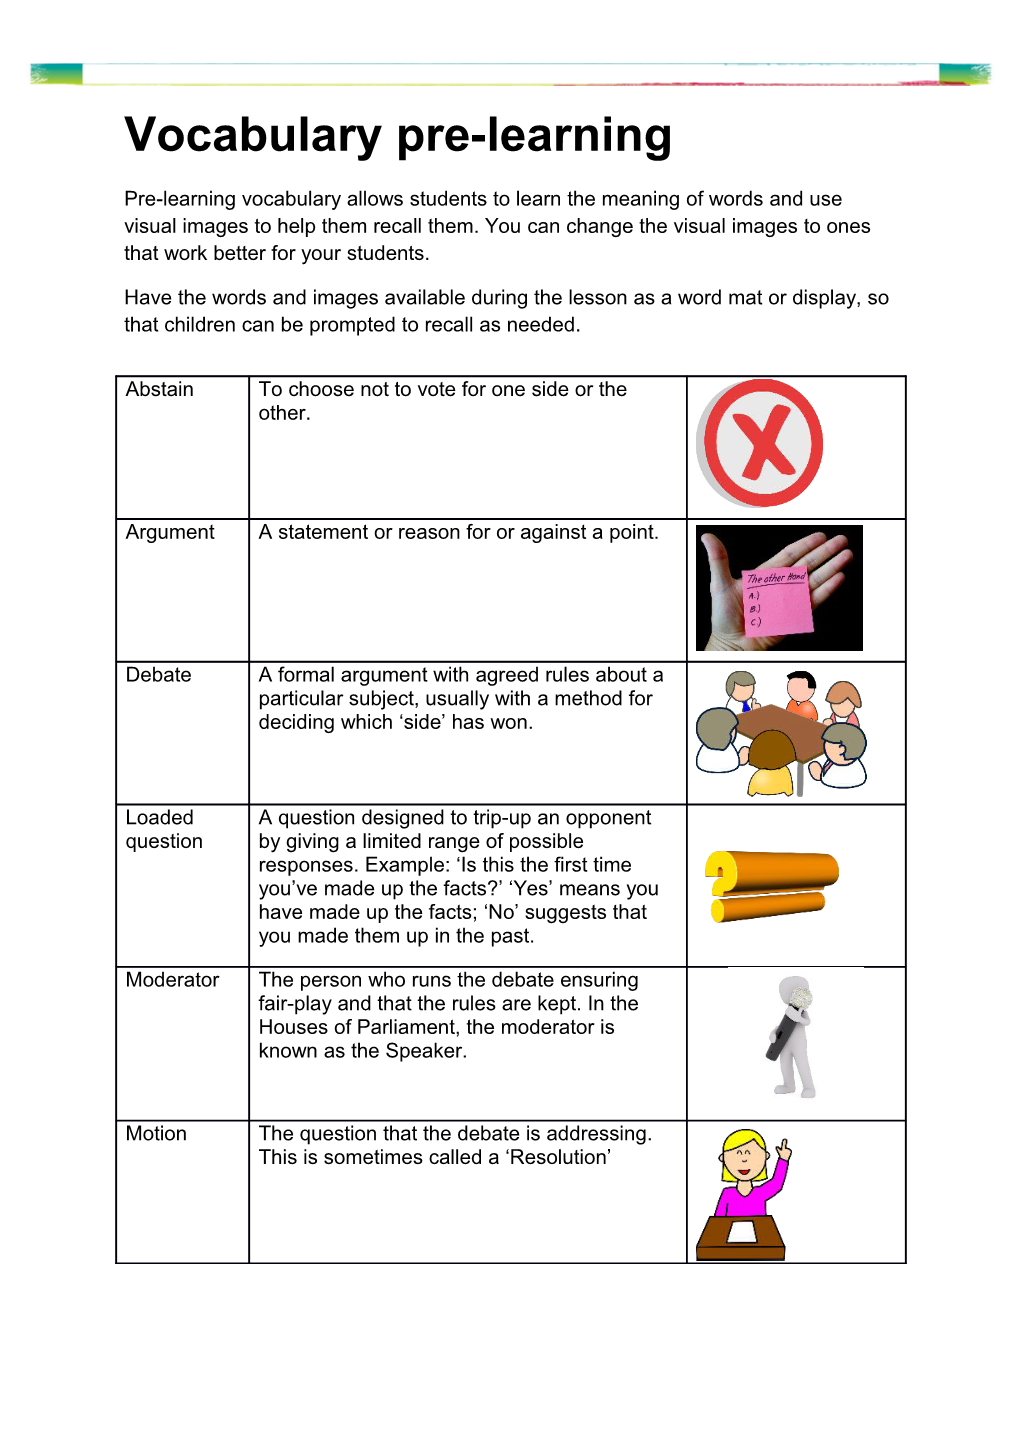 Vocabulary Pre-Learning s1